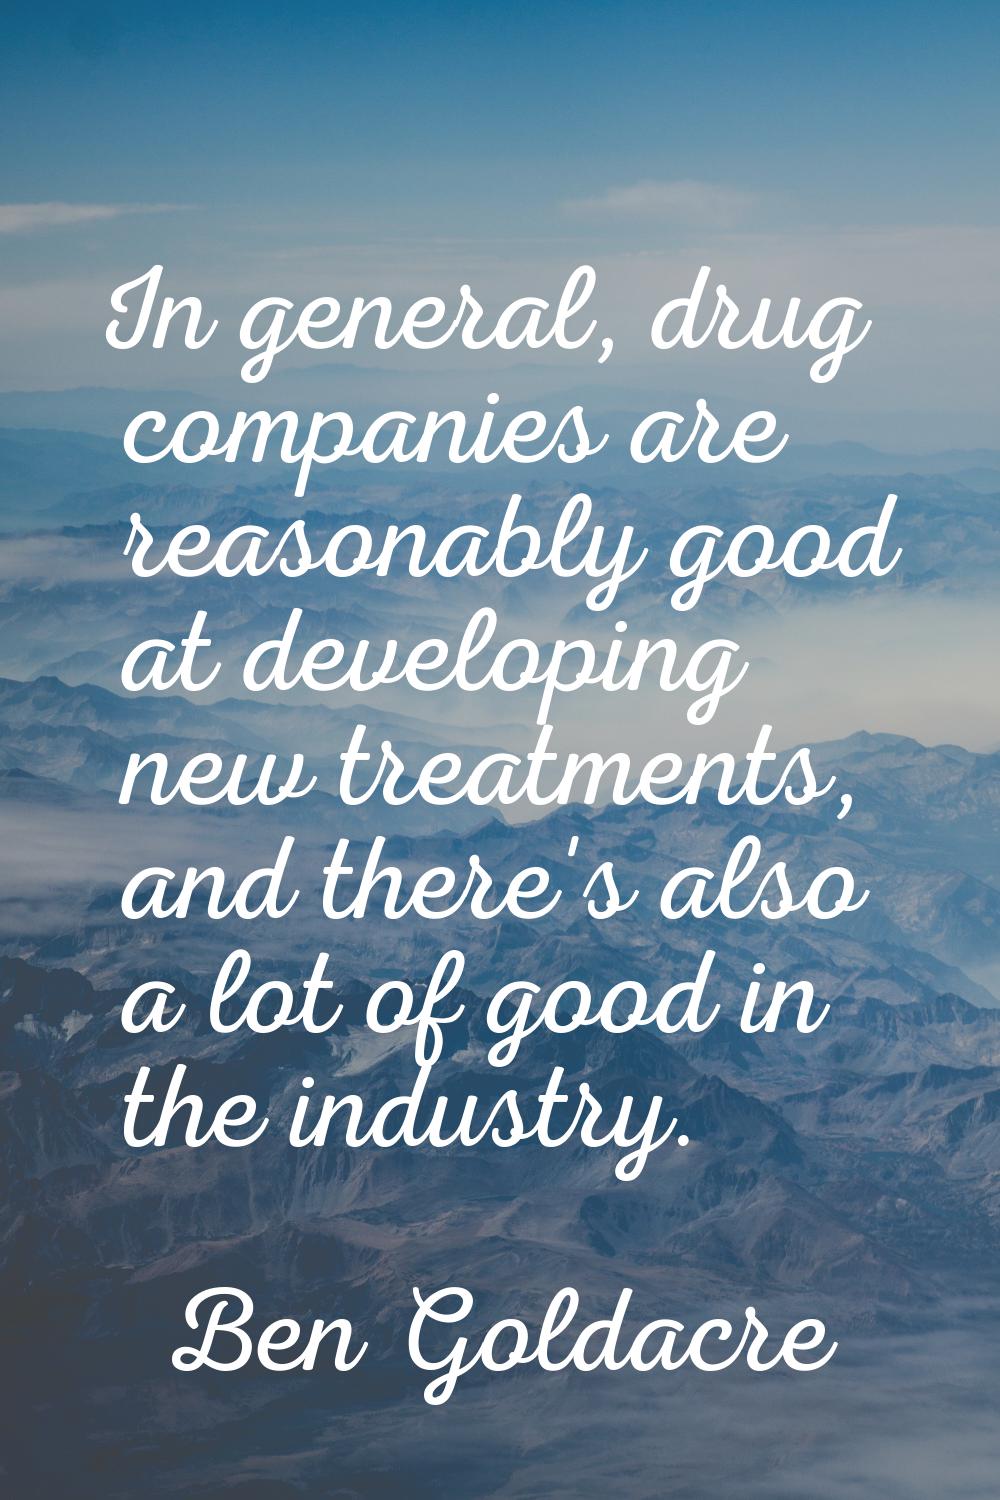 In general, drug companies are reasonably good at developing new treatments, and there's also a lot